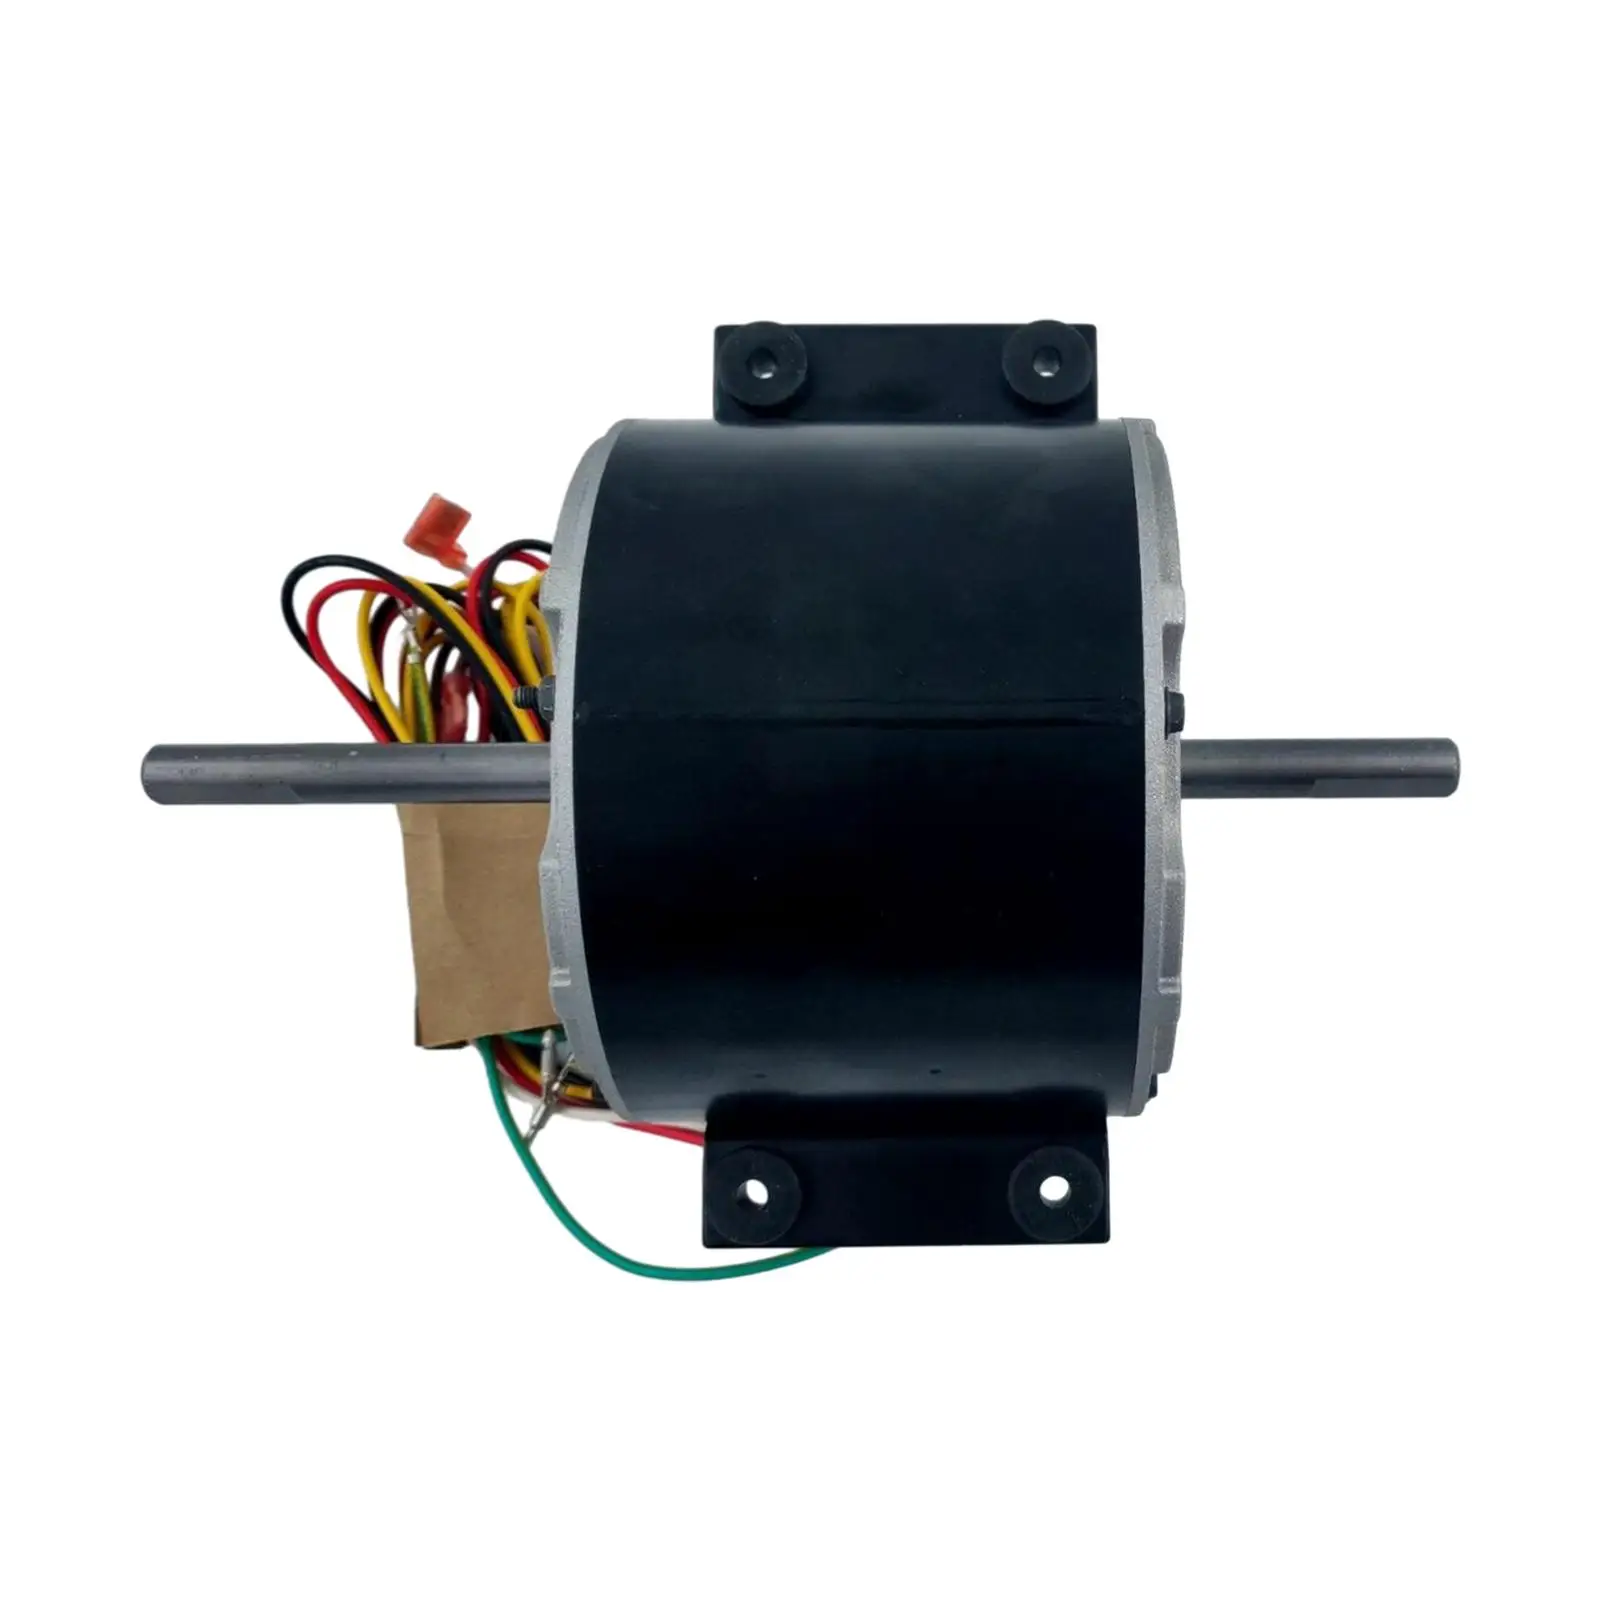 Condenser Fan Motor 3315332.005 Aluminum Alloy Replacement Parts for II Penguin B59516 B59196 B59186 Accessories